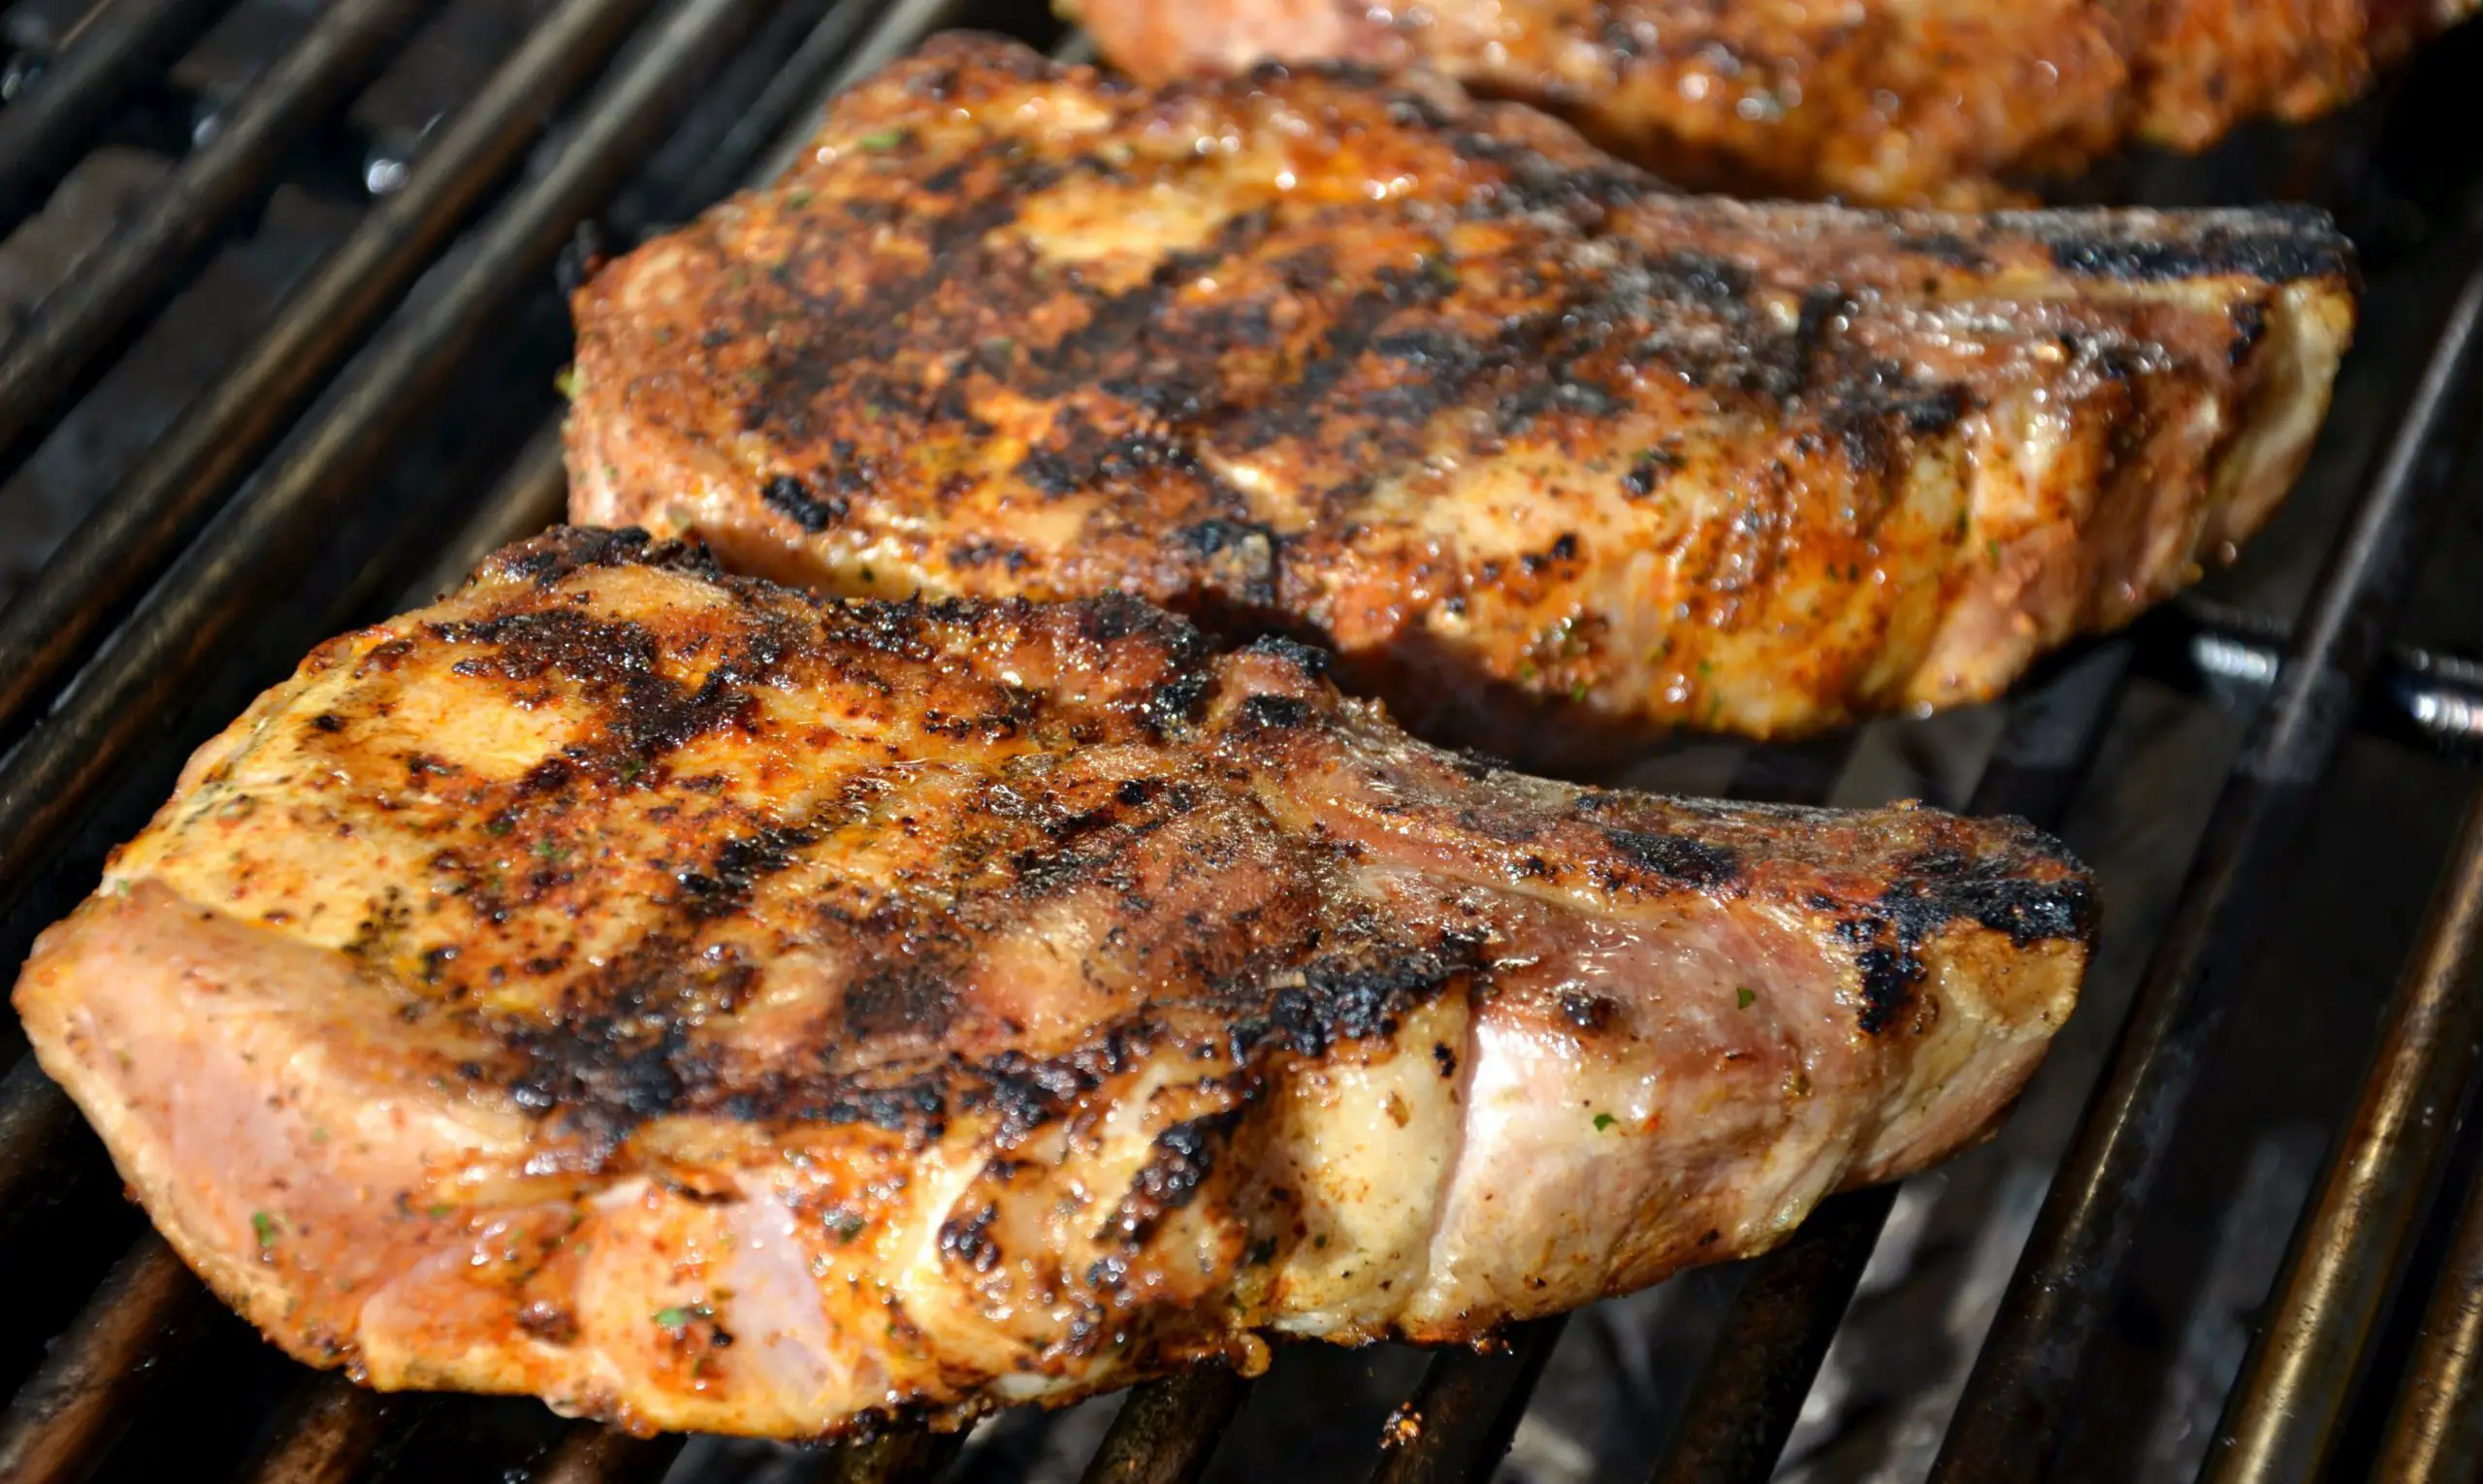 Pump Extra Flavor to Grilled Pork Chops With a Beer Brine